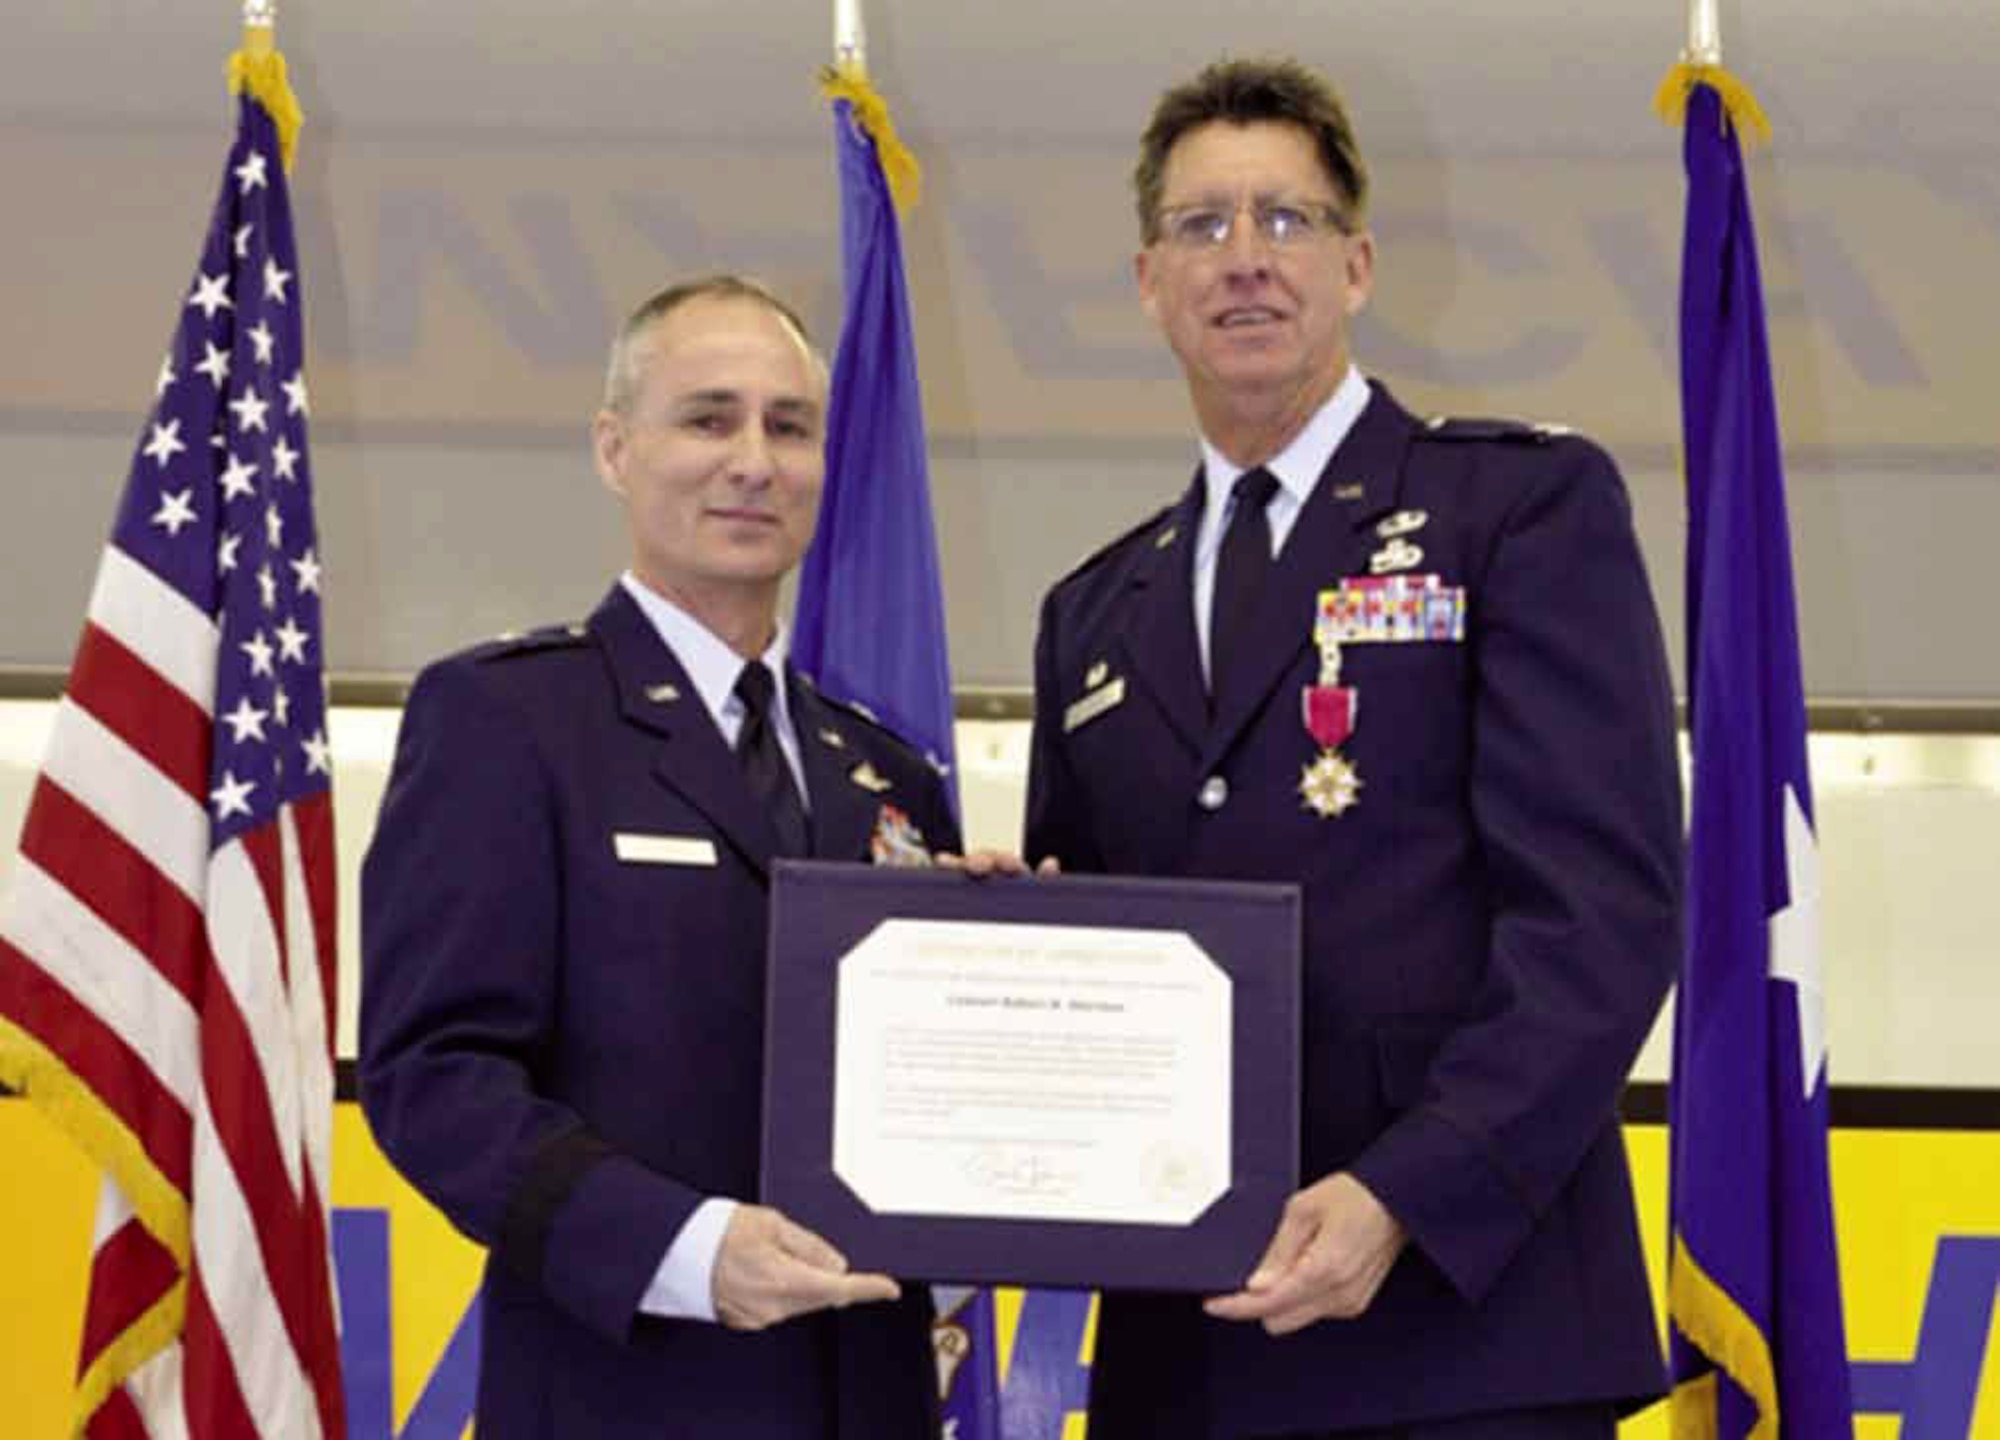 Col. Stormes (right), commander, 452d Maintenance Group, March Air Reserve Base, Calif., retired after more than 30 years of dedicated military service, Jan. 5, at a ceremony held in Bldg. 2306. He oversaw the operation of four squadrons that employ more than 1,000 reserve, active duty, DOD civilian and contractor personnel. Brig. Gen. Karl McGregor, deputy director, Air Force Strategic Planning, Headquarters Air Force, Pentagon, Washington, D.C. had the honor of presenting Col. Stormes with his retirement certificate and medal. (U.S. Air Force photo by Staff Sgt. Joe Davidson)